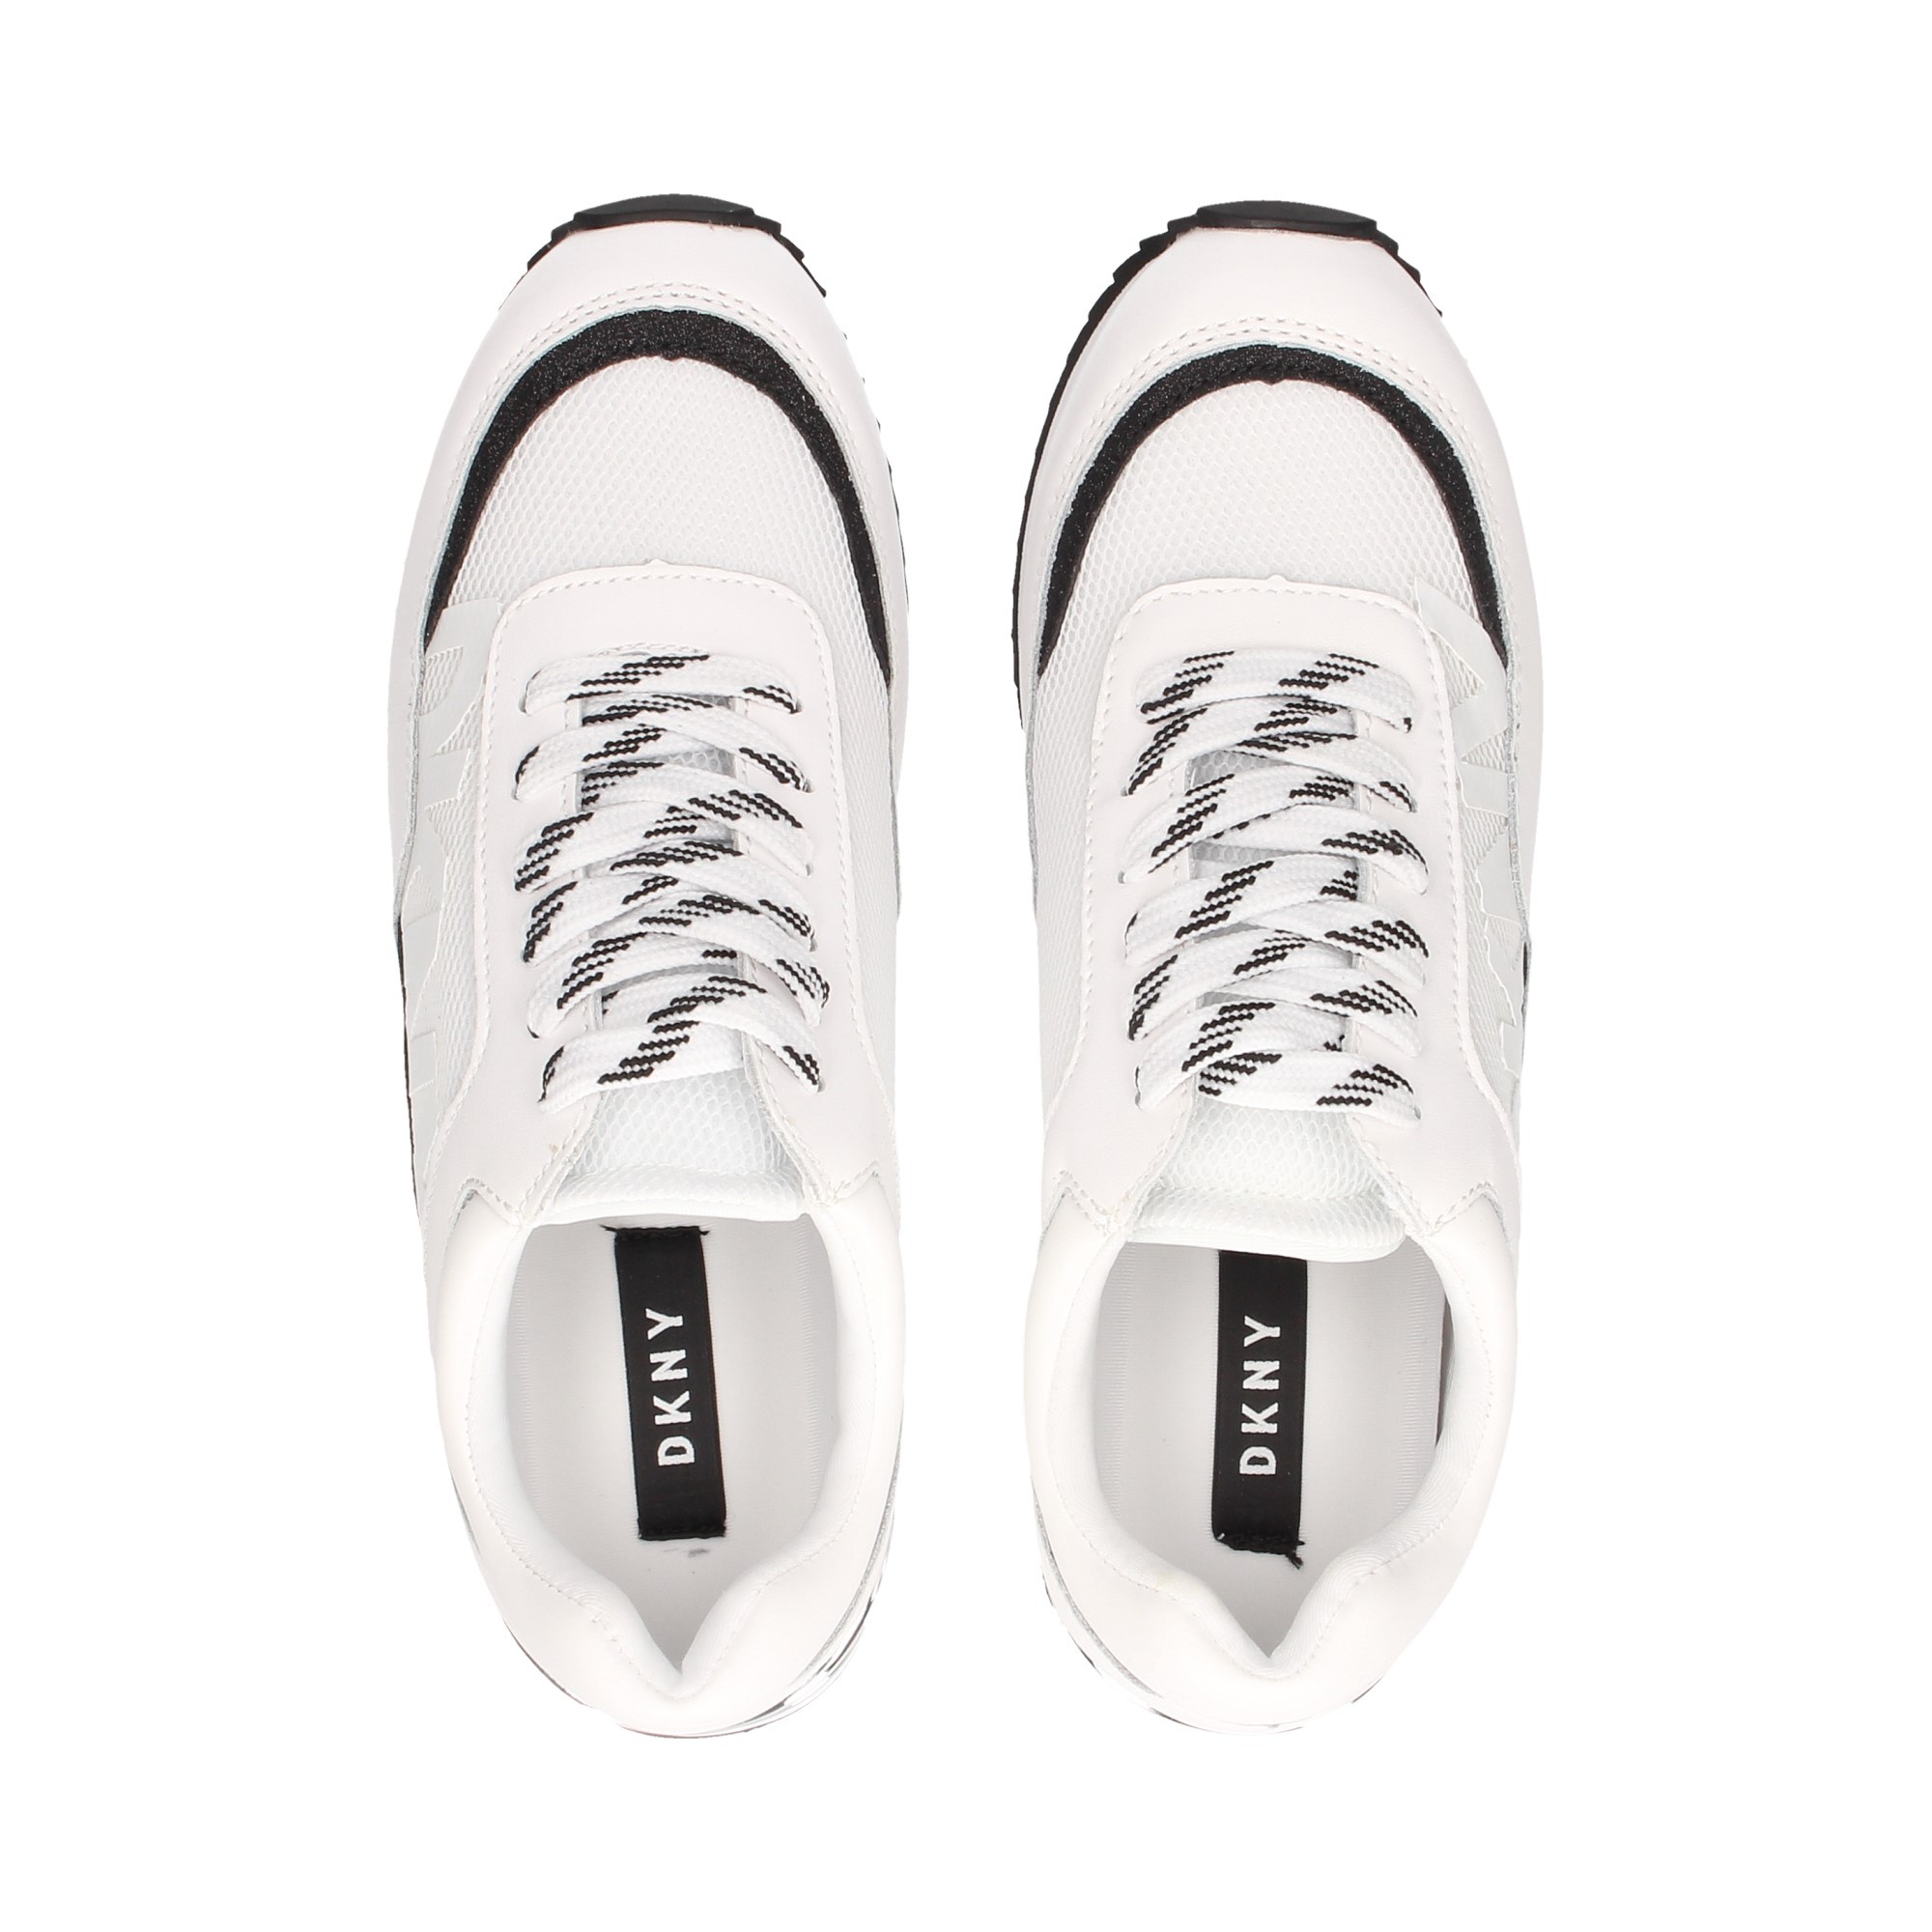 sports-acord-maille-peau-blanche